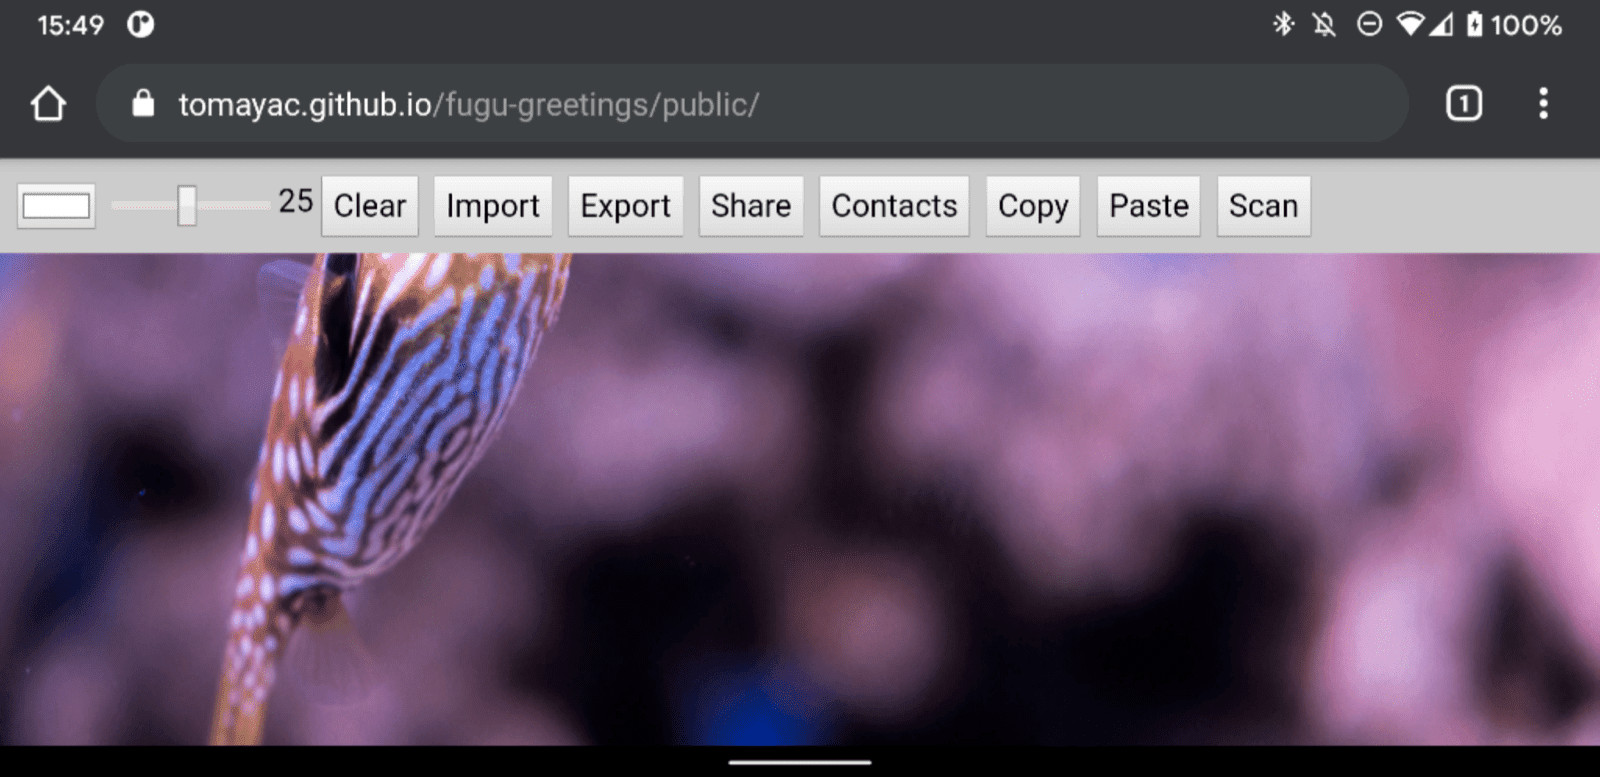 Fugu Greetings running on Android Chrome, showing many available features.